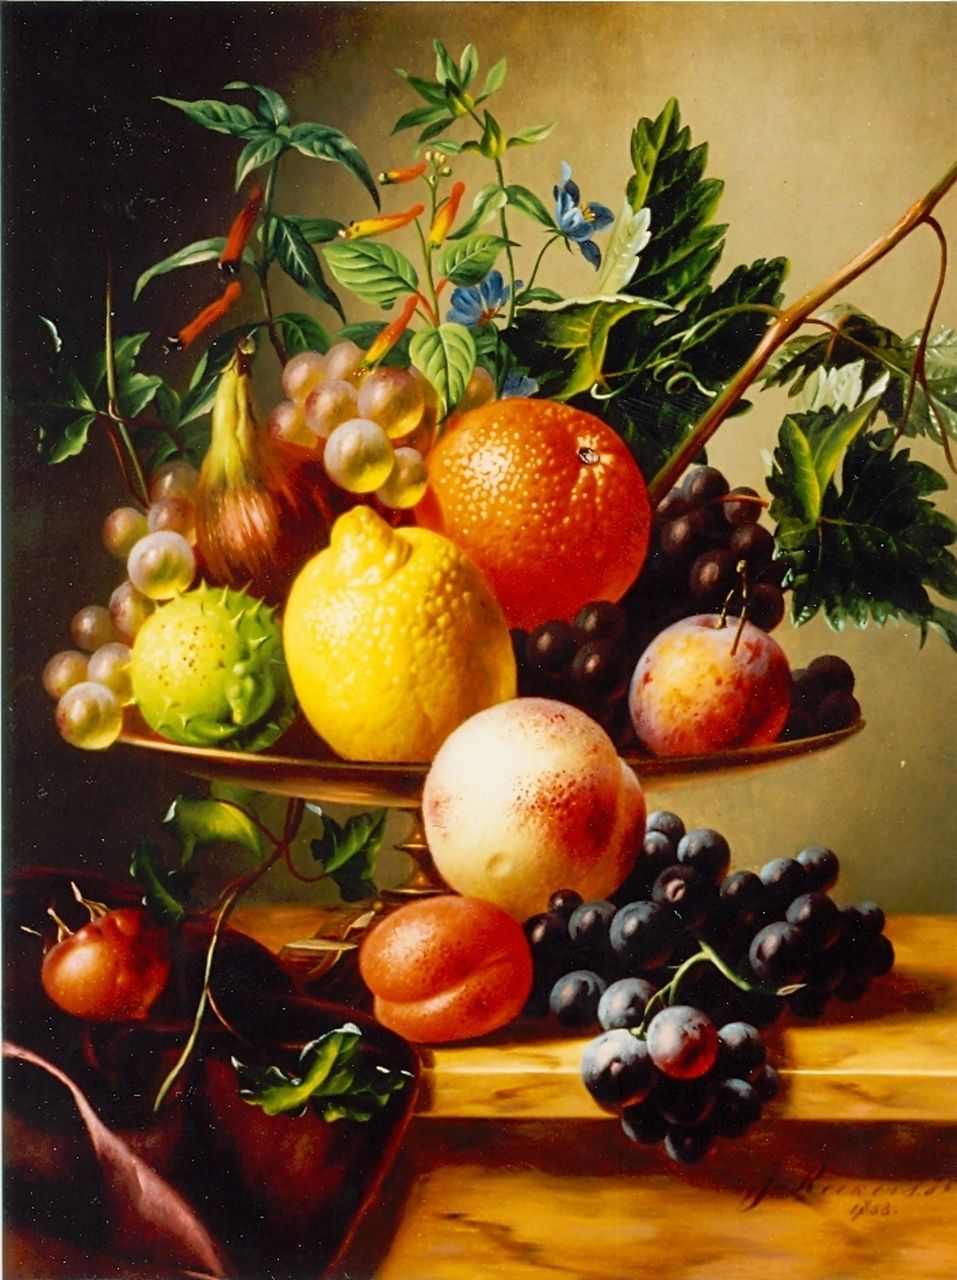 Reekers jr. Joh.  | Johannes Reekers jr., A still life with a lemon, peach and grapes, Öl auf Holz 43,7 x 34,2 cm, signed l.r. und dated 1853